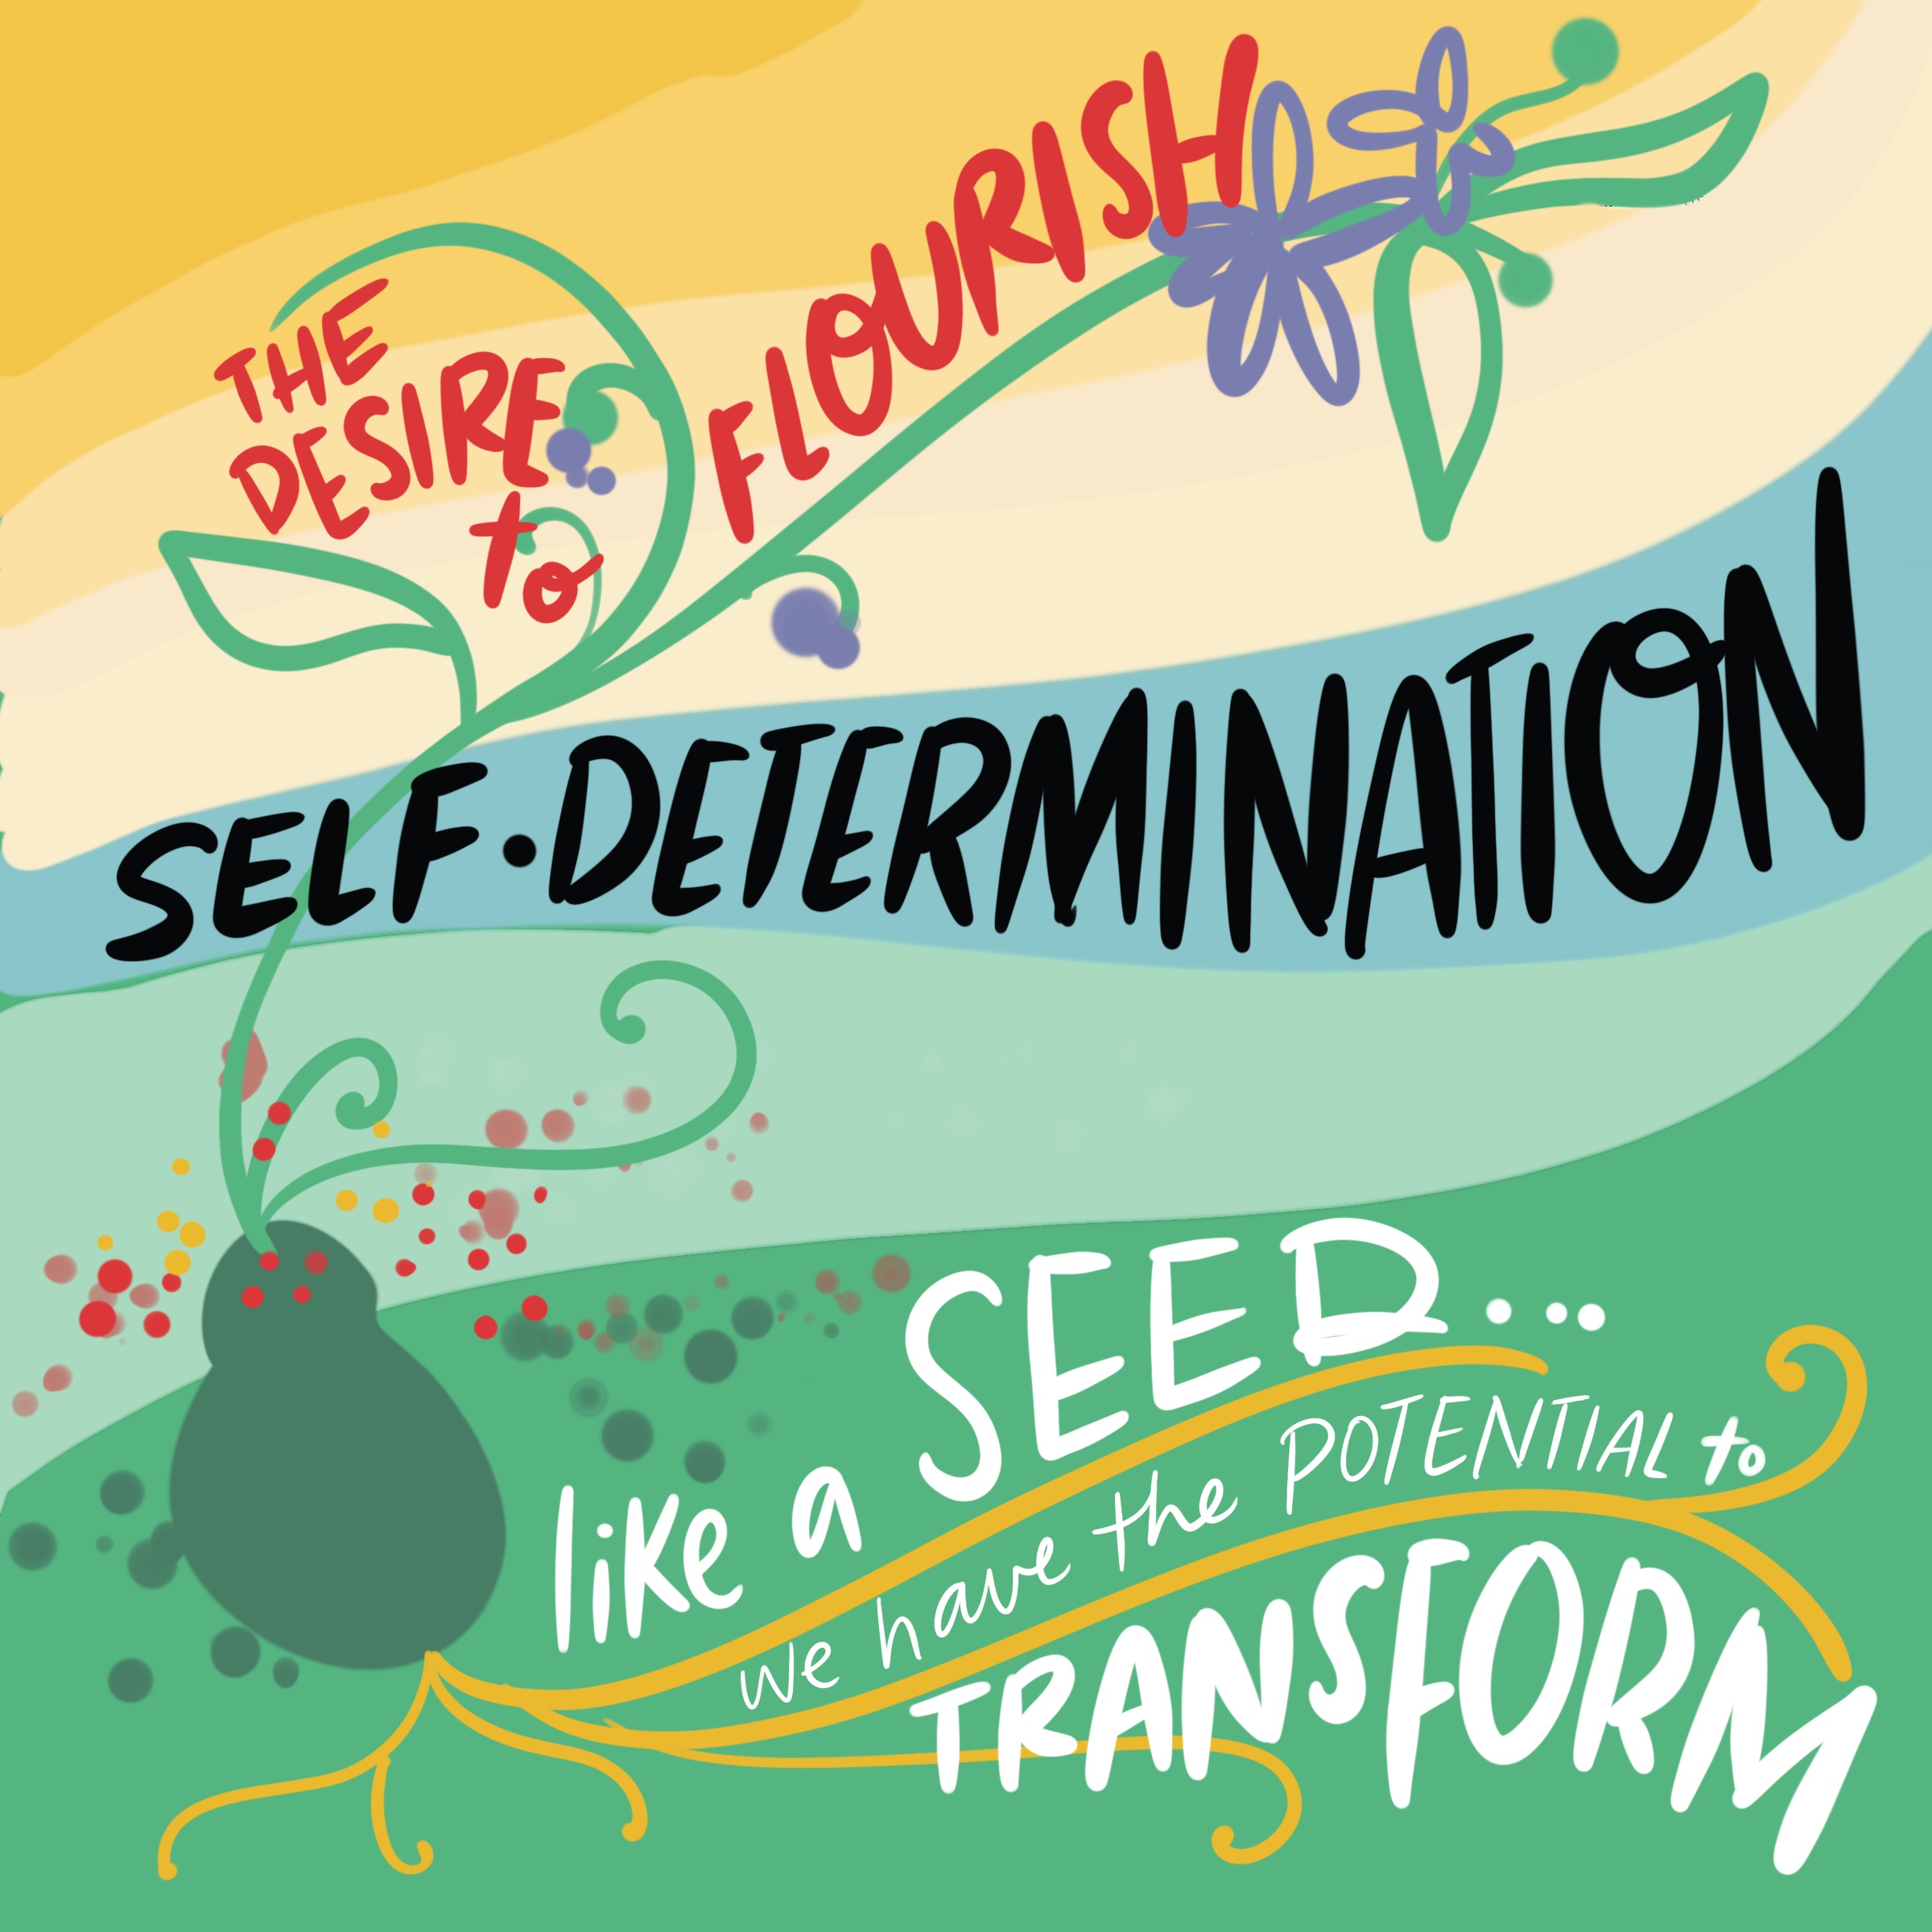 self determination, the desire to flourish like a seed. we have the potential to transform